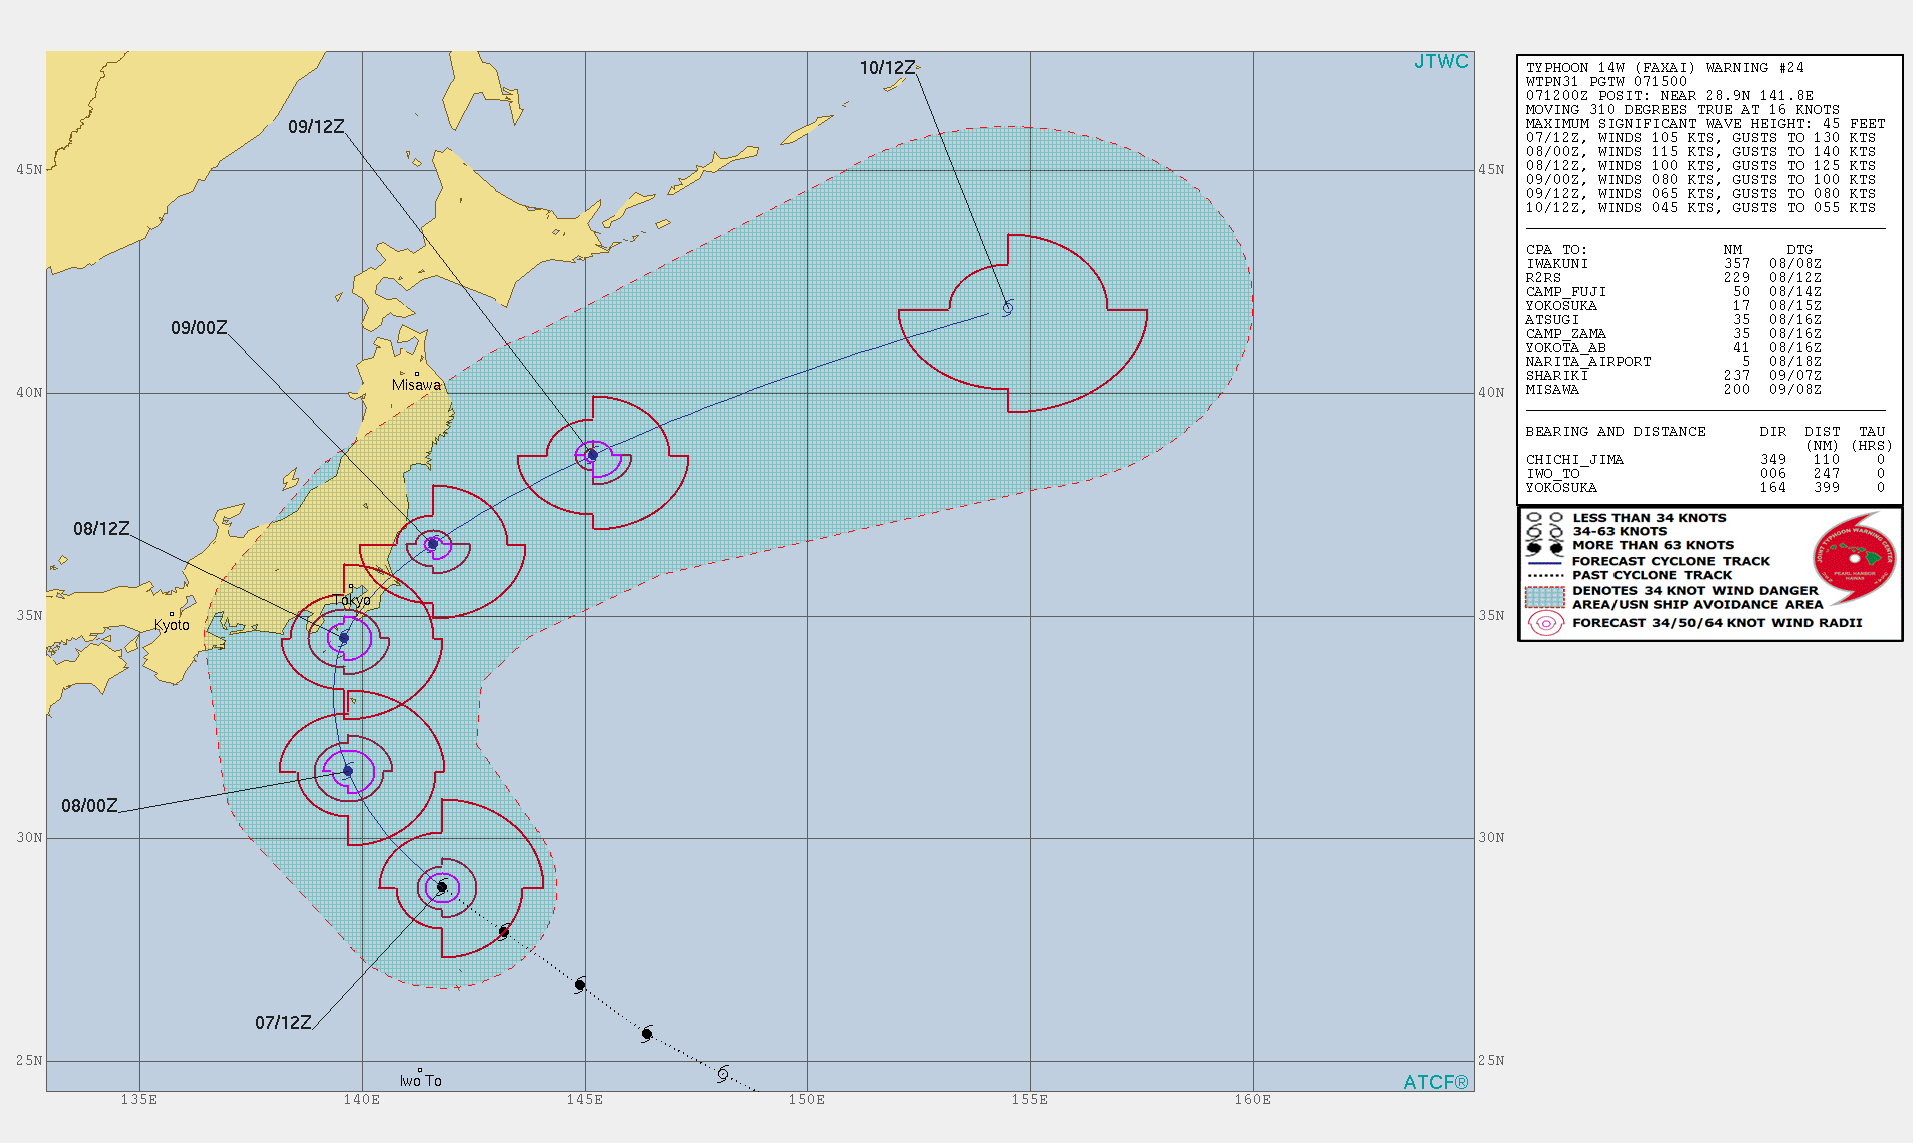 Typhoon Faxai: compact and dangerous category 3, rapidly approaching Tokyo area within 24h